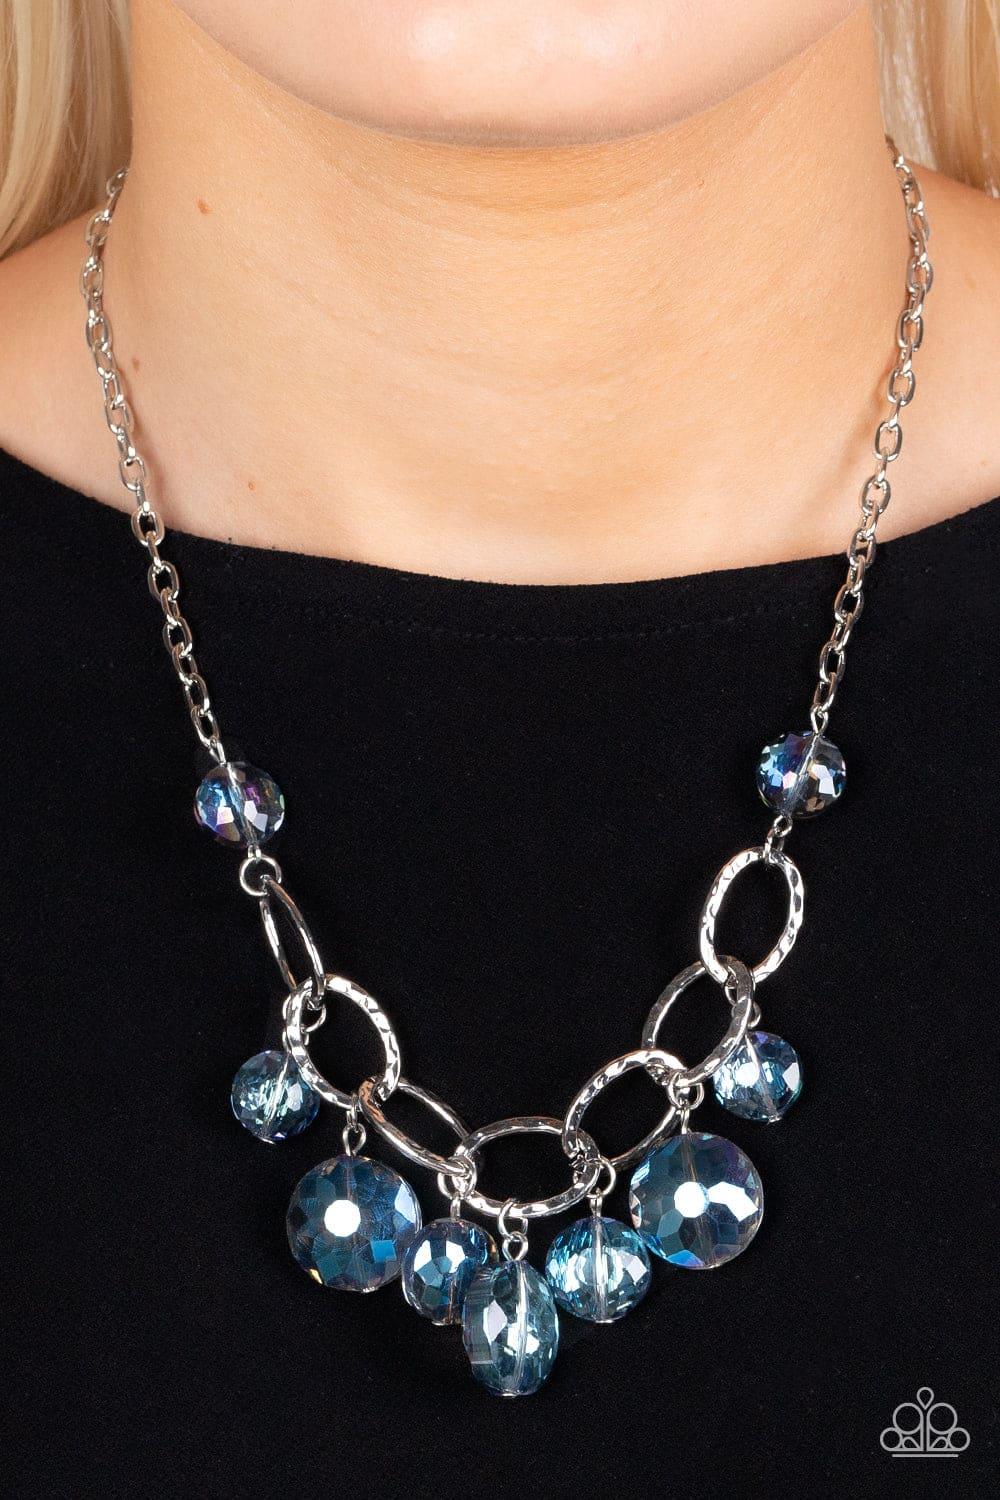 Paparazzi Accessories - Rhinestone River - Blue Necklace - Bling by JessieK